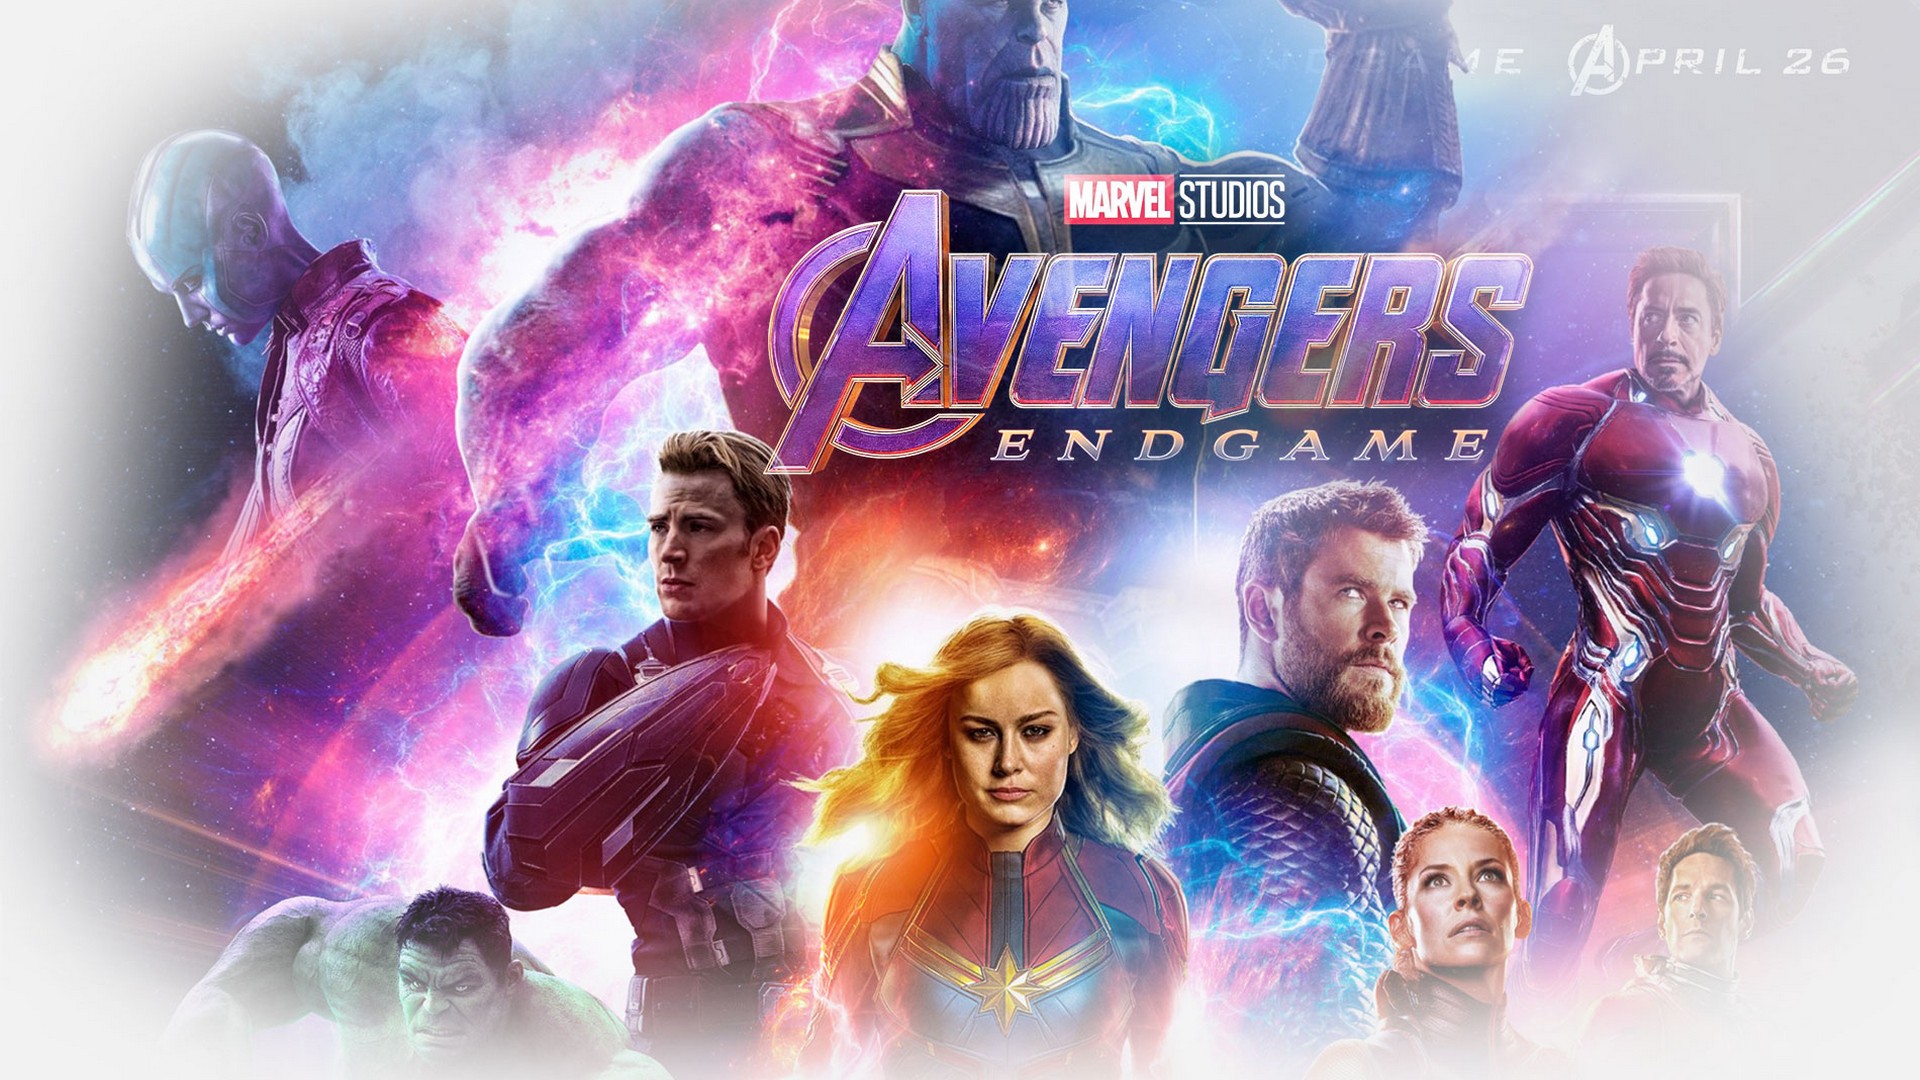 Avengers Endgame Wallpaper For Desktop with high-resolution 1920x1080 pixel. You can use this poster wallpaper for your Desktop Computers, Mac Screensavers, Windows Backgrounds, iPhone Wallpapers, Tablet or Android Lock screen and another Mobile device